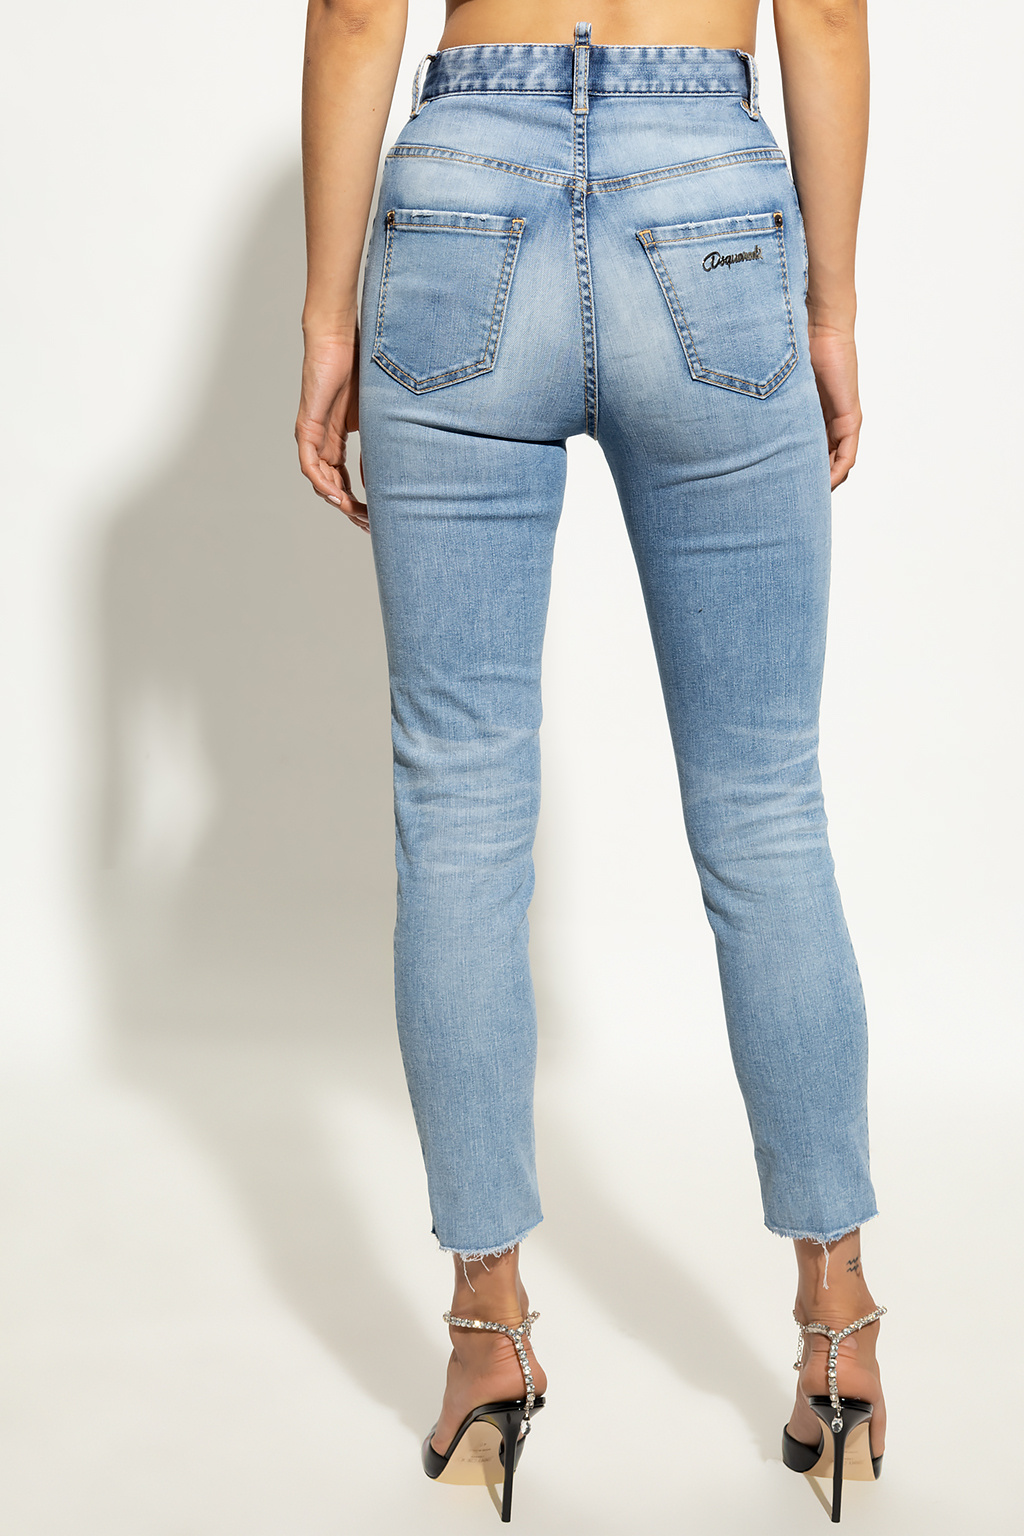 Dsquared2 ‘Cropped Twiggy’ jeans